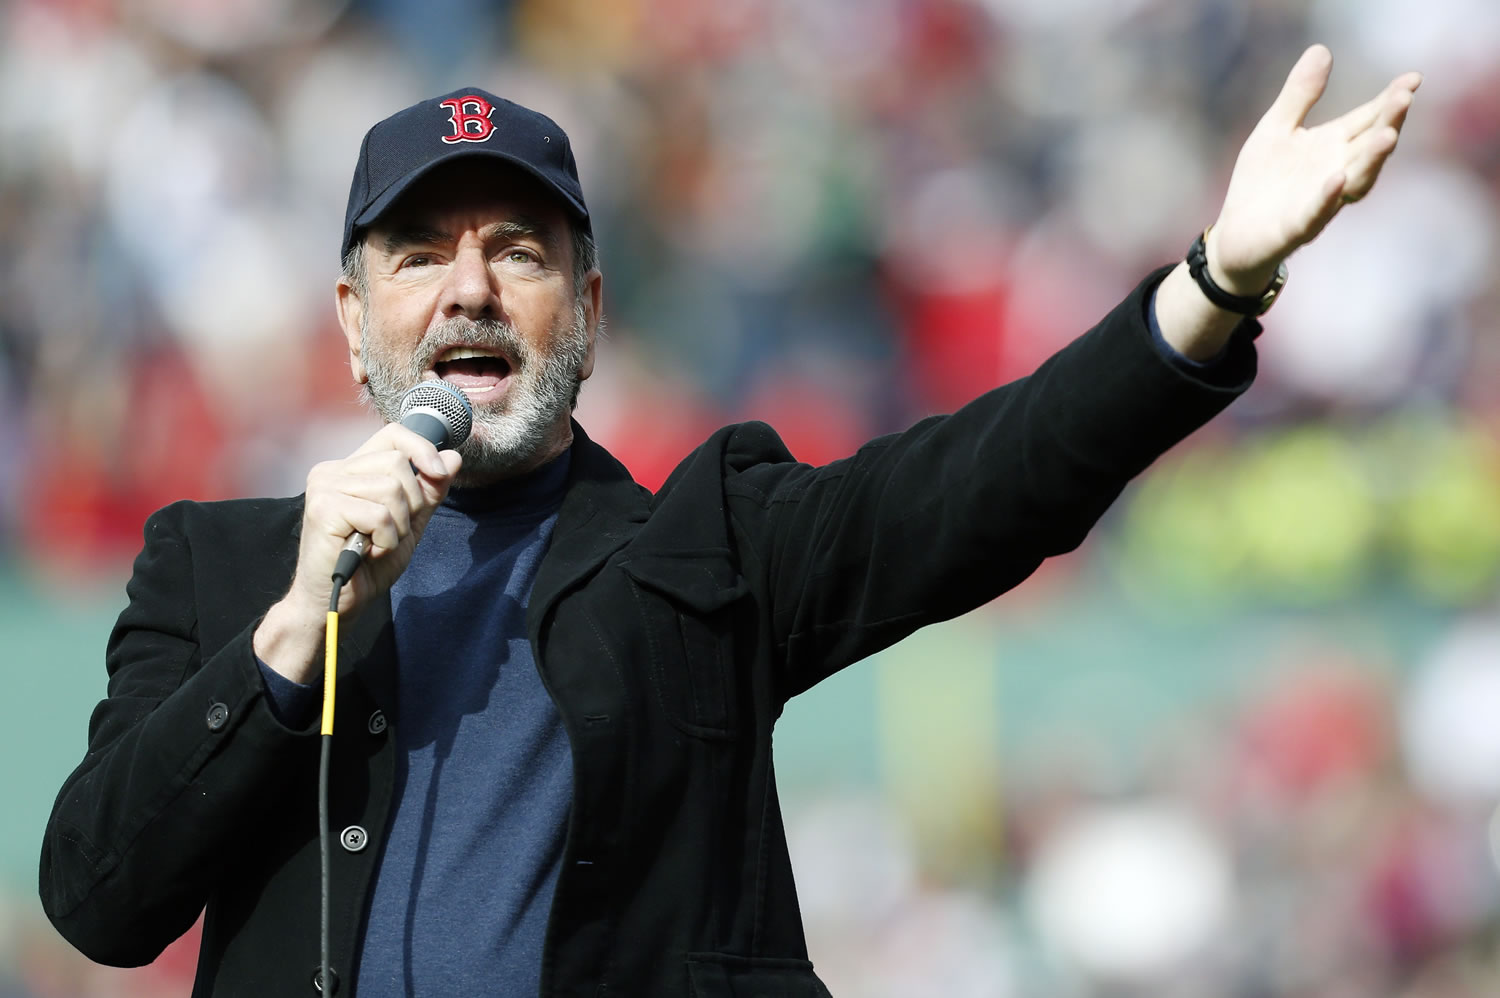 Neil Diamond sings &quot;Sweet Caroline&quot; with the crowd in the eighth inning of a baseball game between the Boston Red Sox and the Kansas City Royals in Boston on April 20.